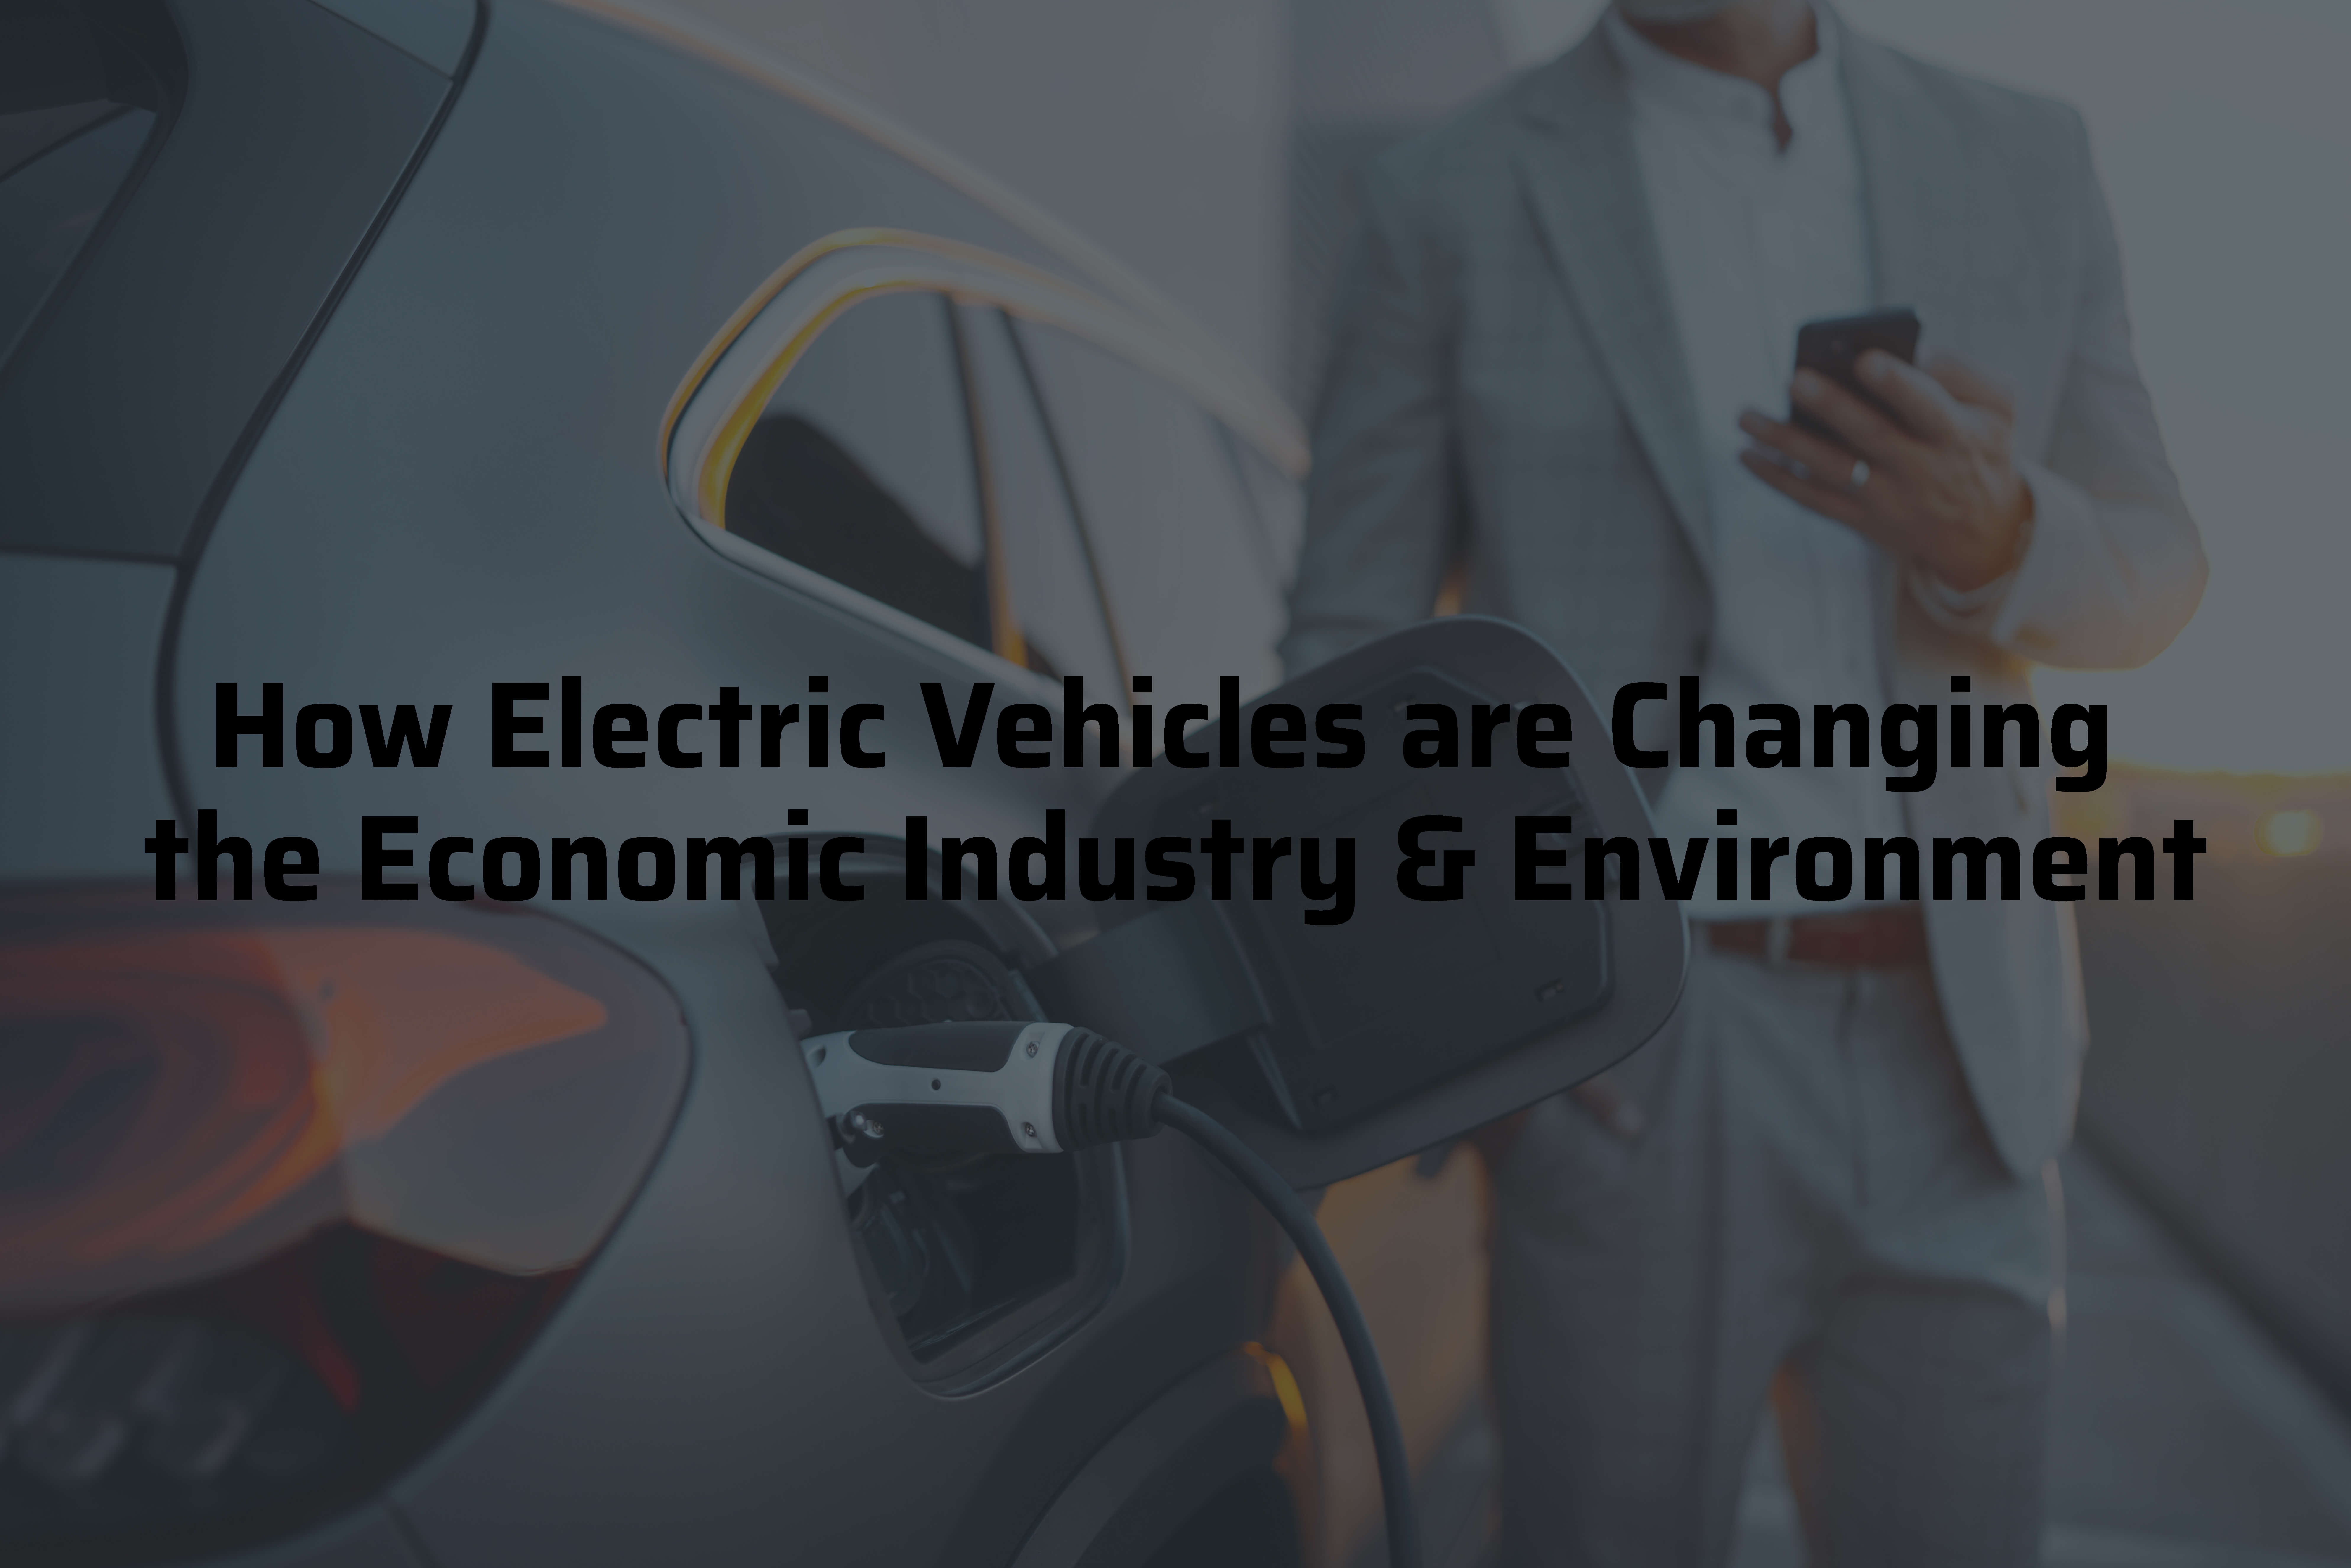 electric vehicles are changing the economy and environment